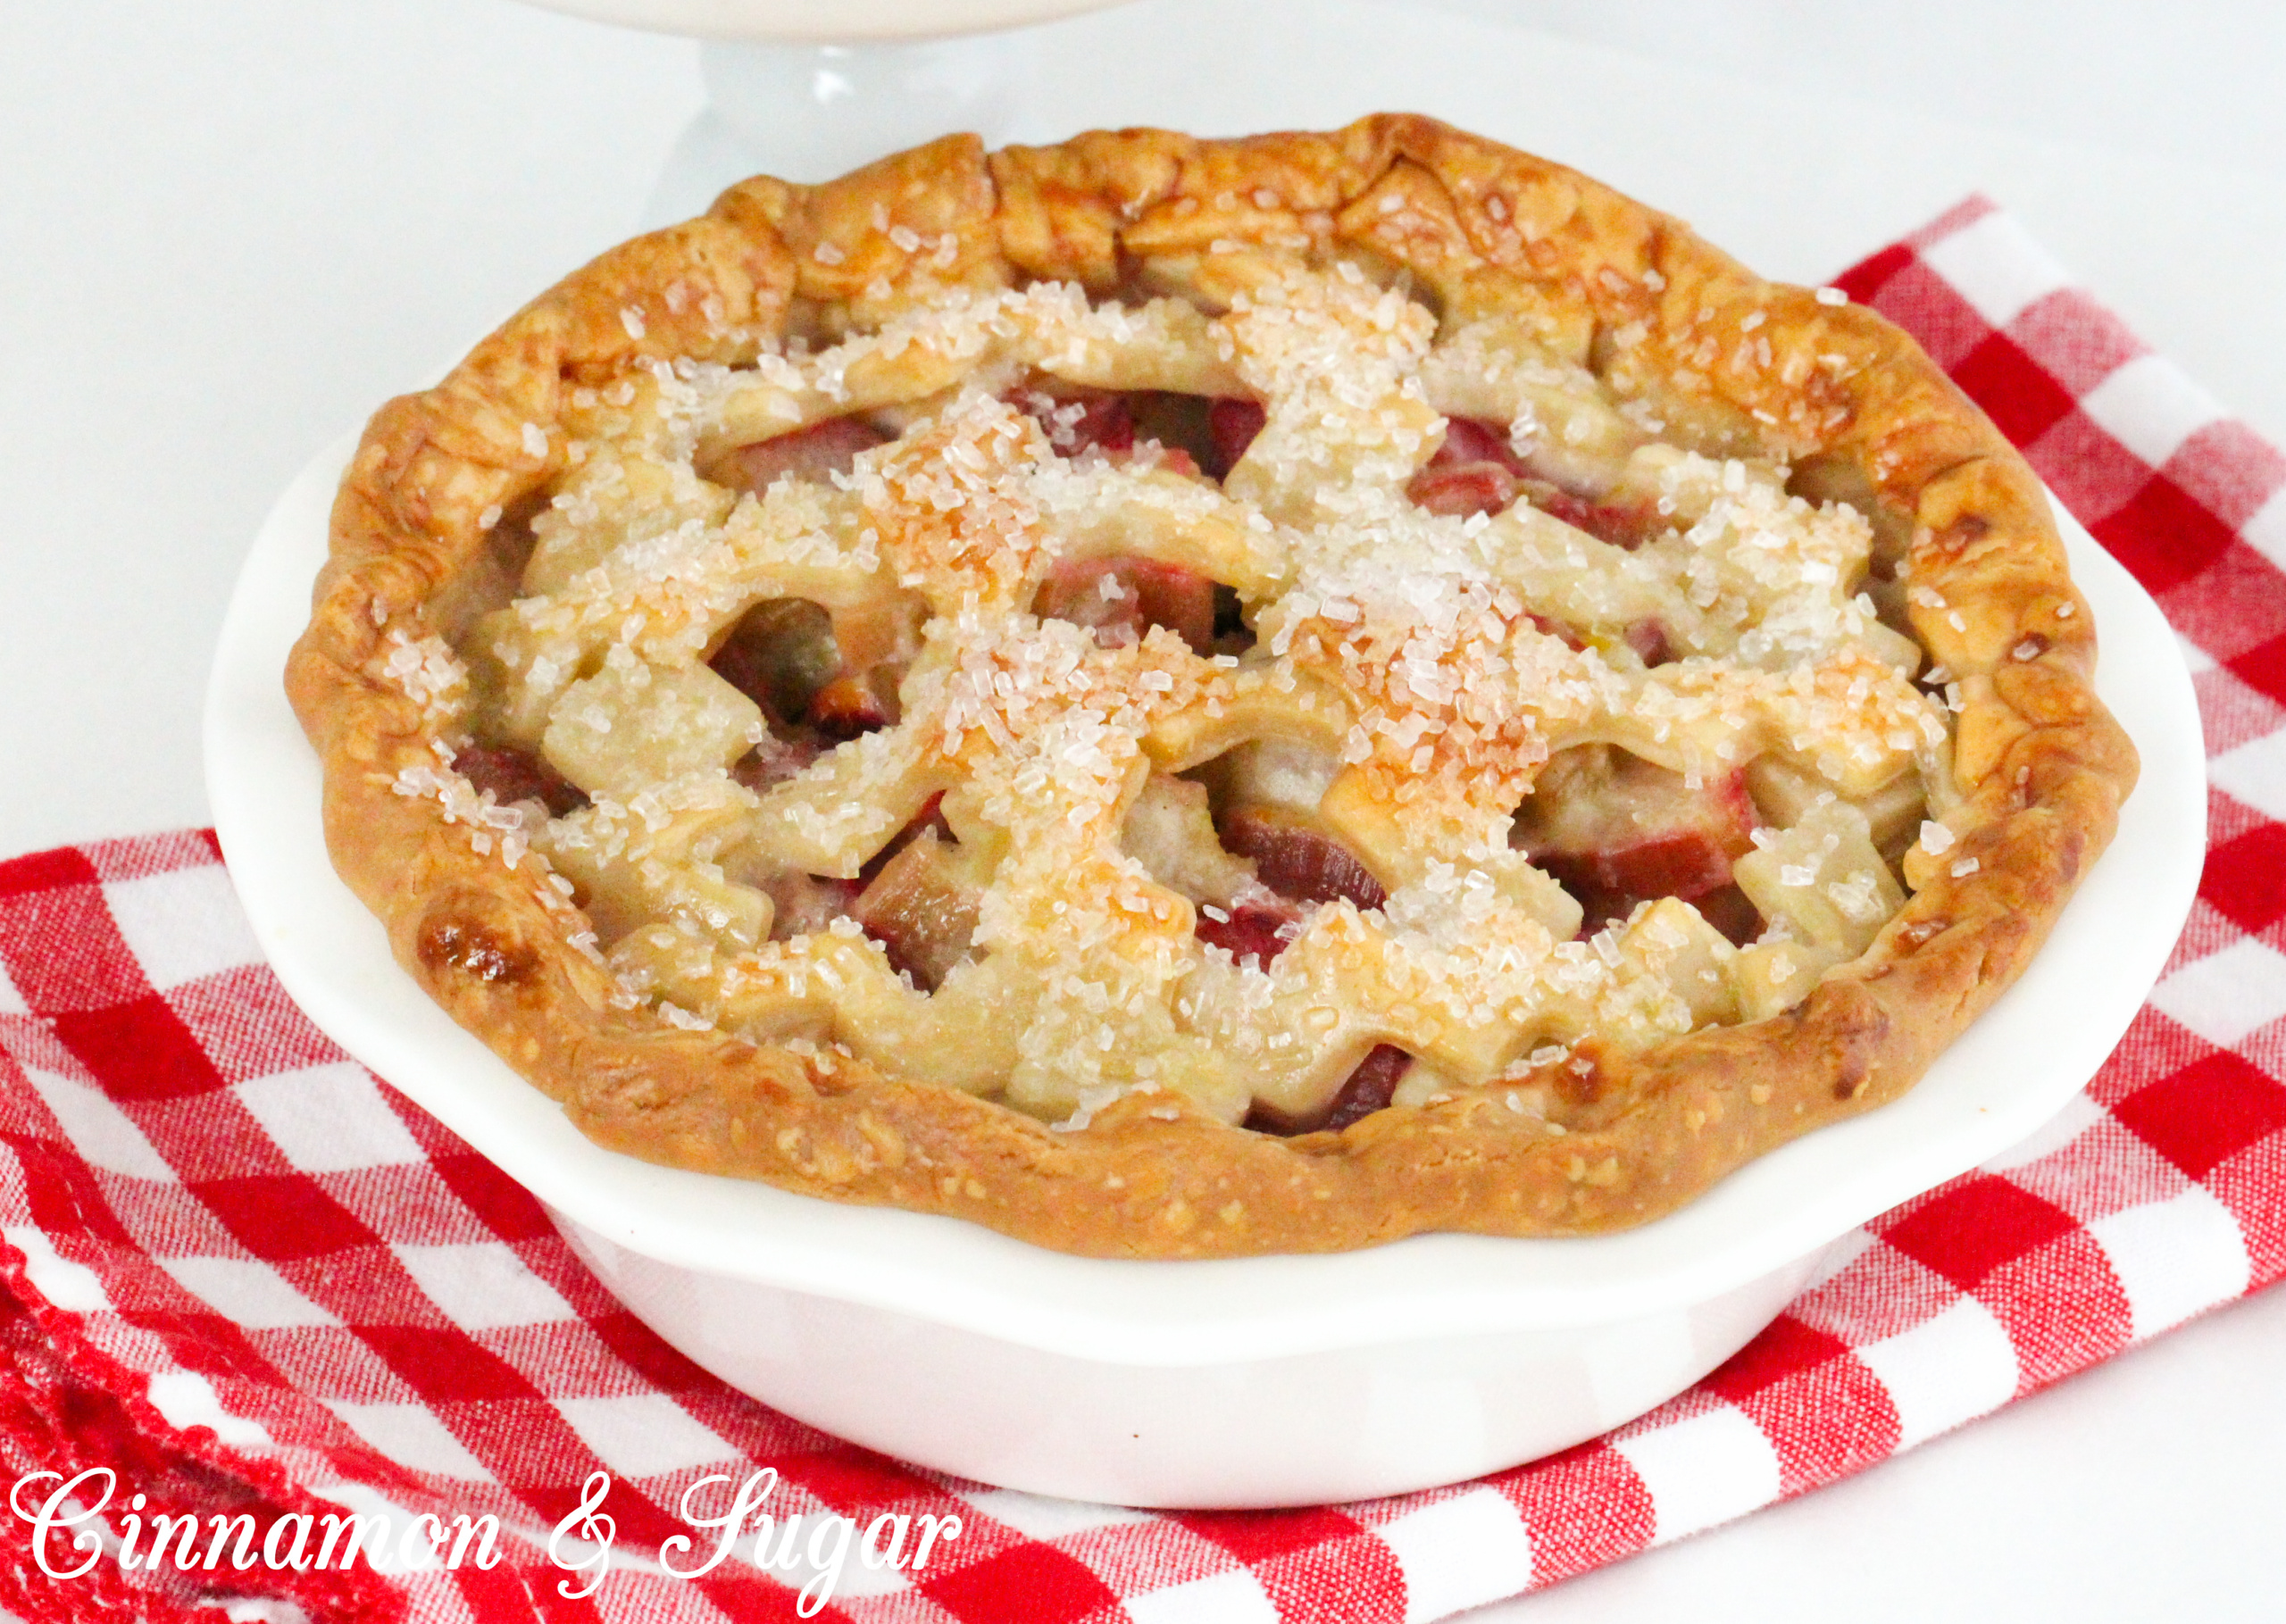 Juicy and sweet/tart, the pretty and delicious pink rhubarb filling and flaky crust make these mini rhubarb pies a delicious ending to any meal. Recipe shared with permission granted by Tracy Gardner, author of BEHIND THE FRAME.